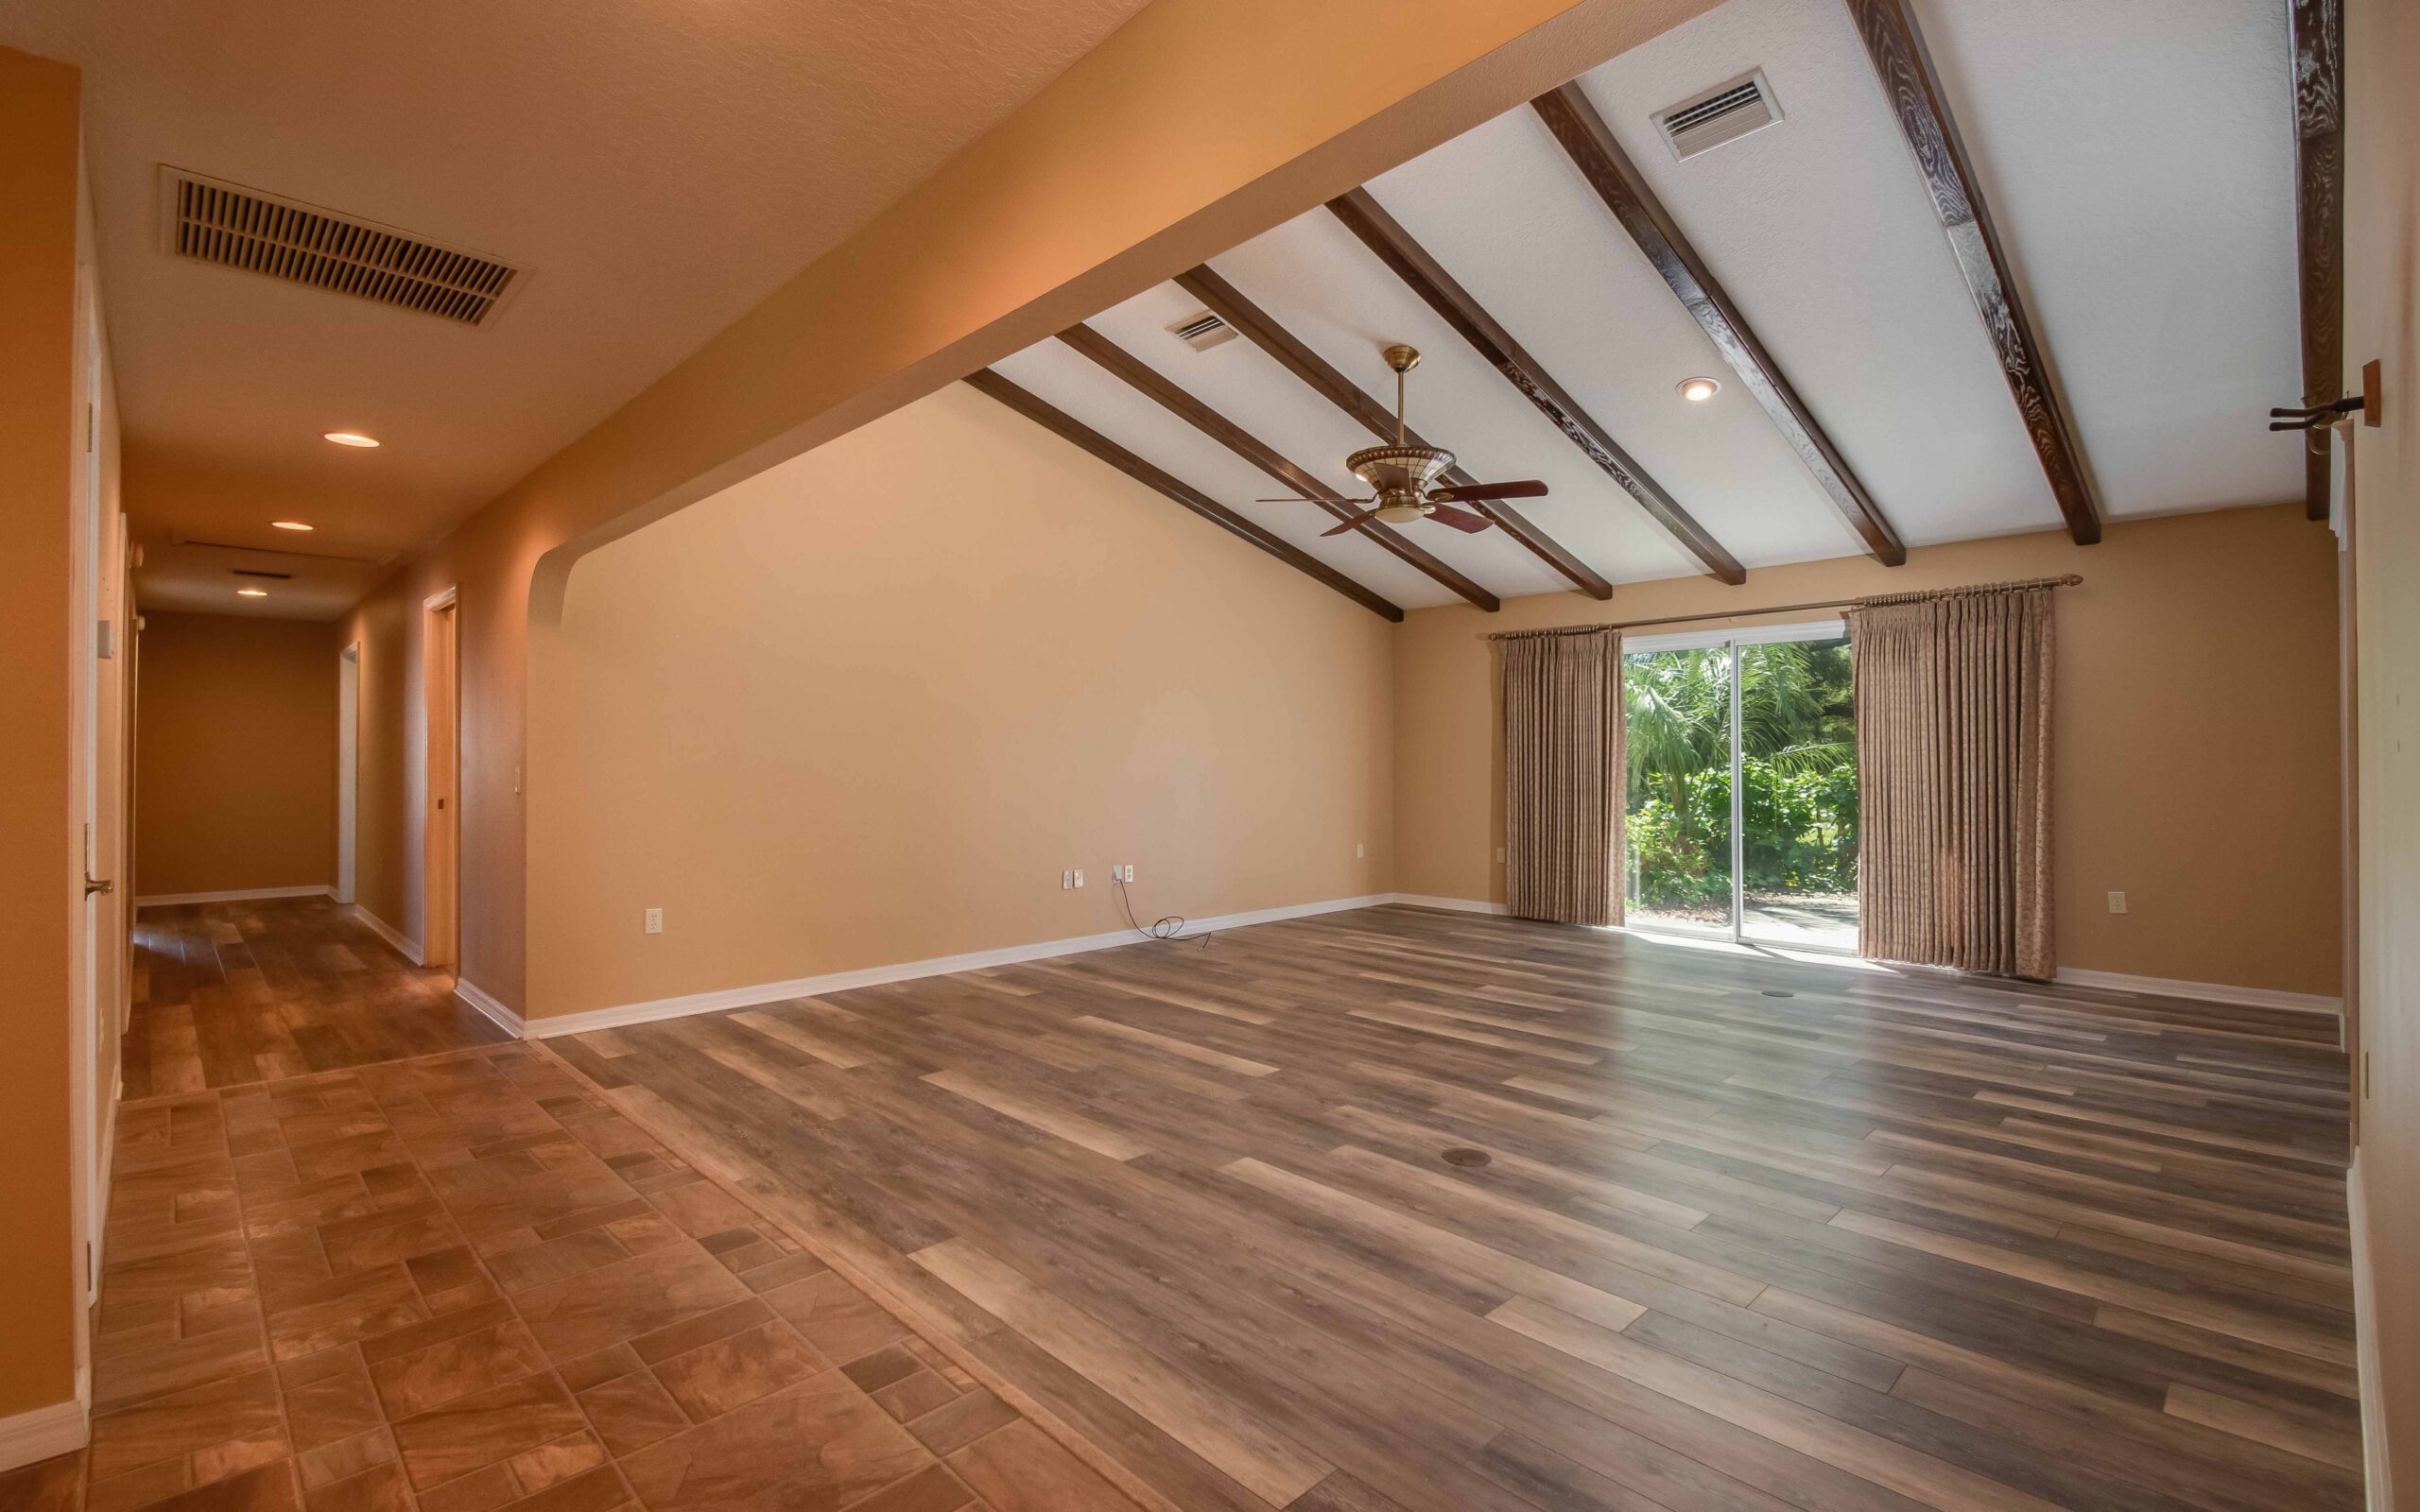 The beautiful wood-beamed ceiling of the living room at Pleasant Oaks